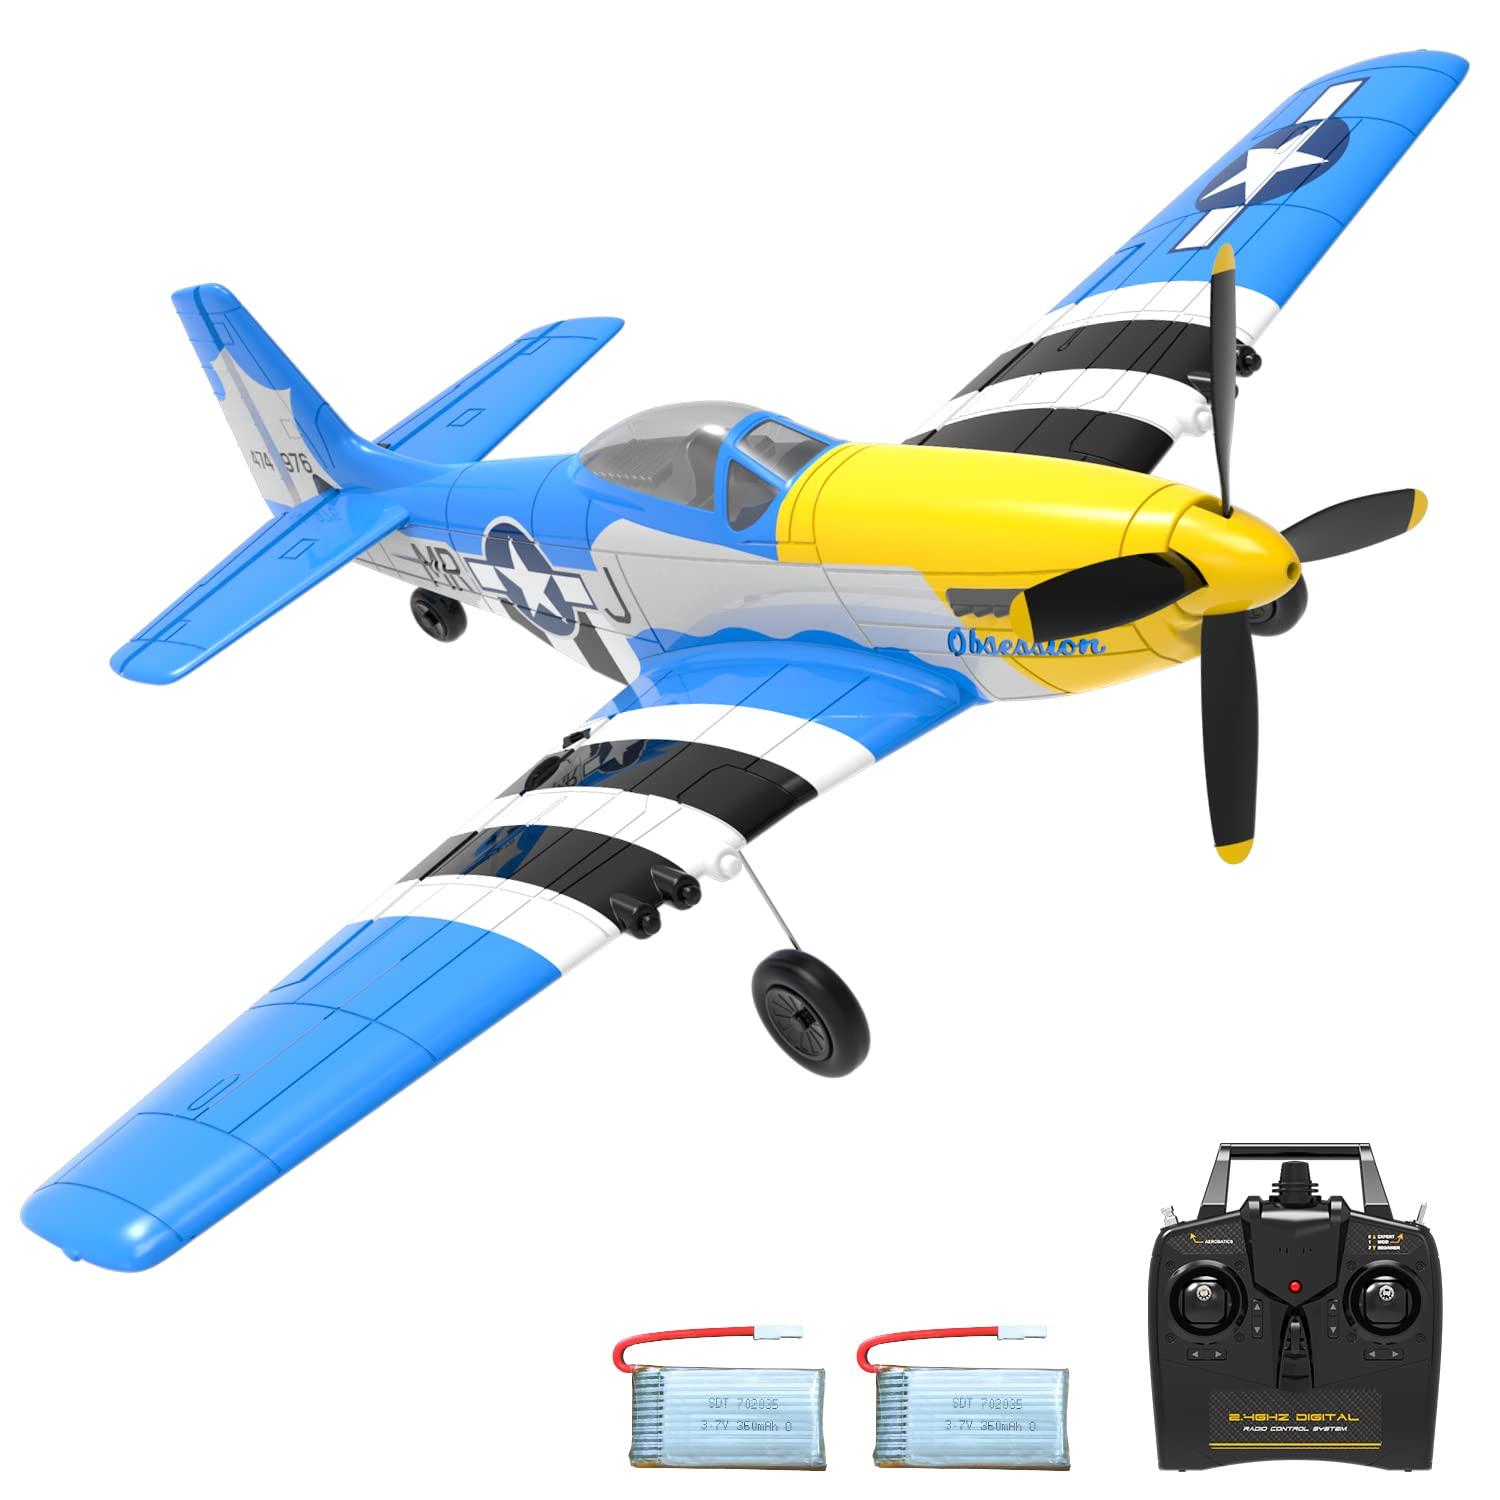 Volantexrc 4 Ch Rc Airplane: Top Features of the VolantexRC 4 Ch RC Airplane